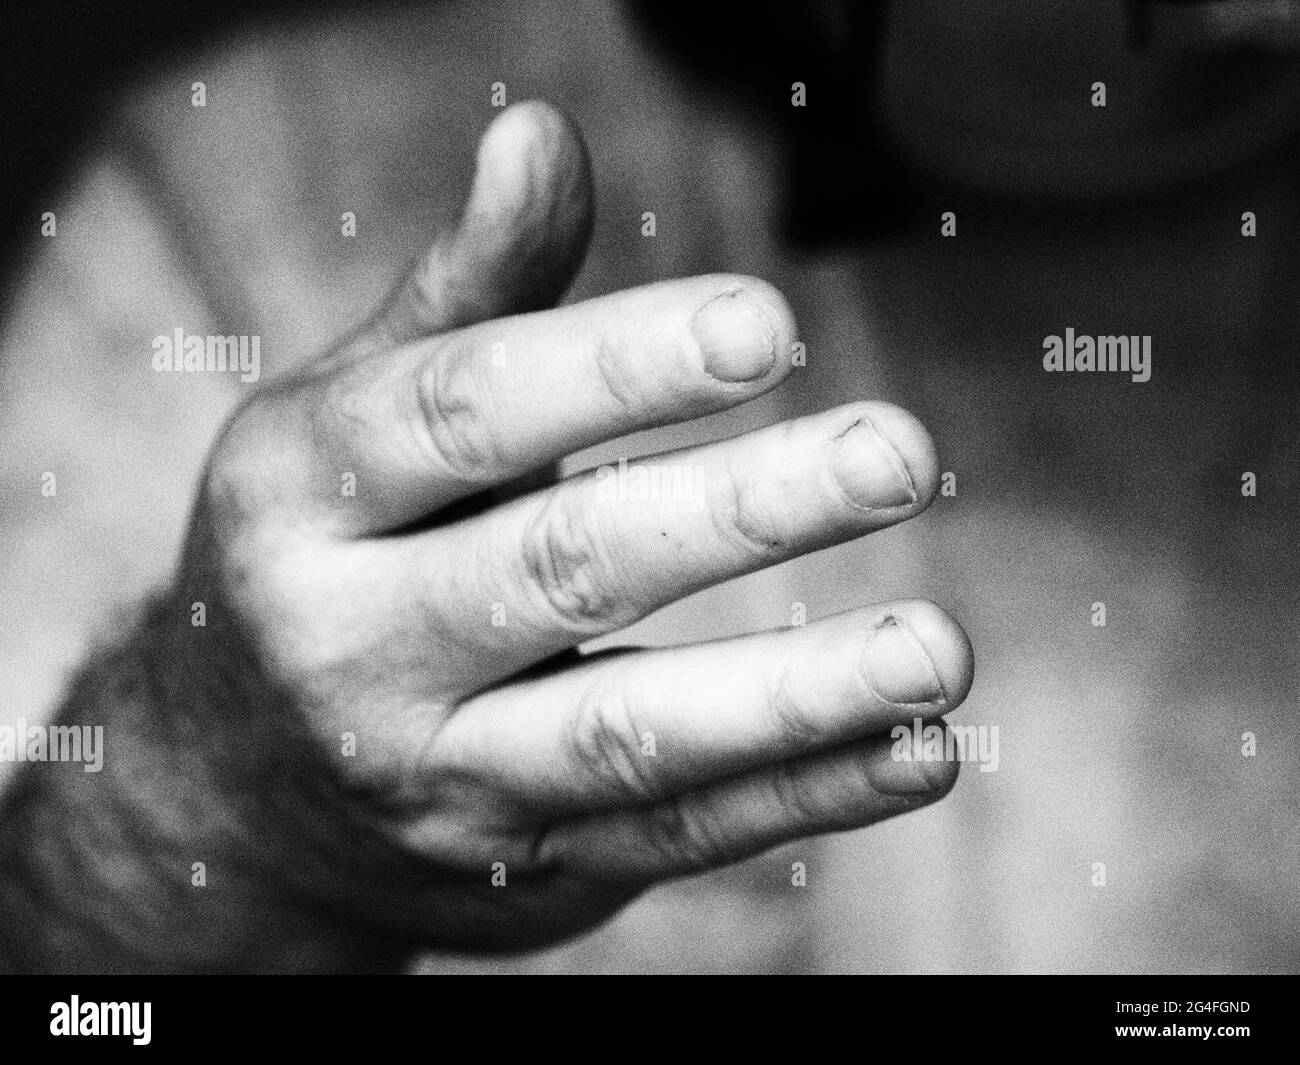 monochrome image of a hand reaching out Stock Photo